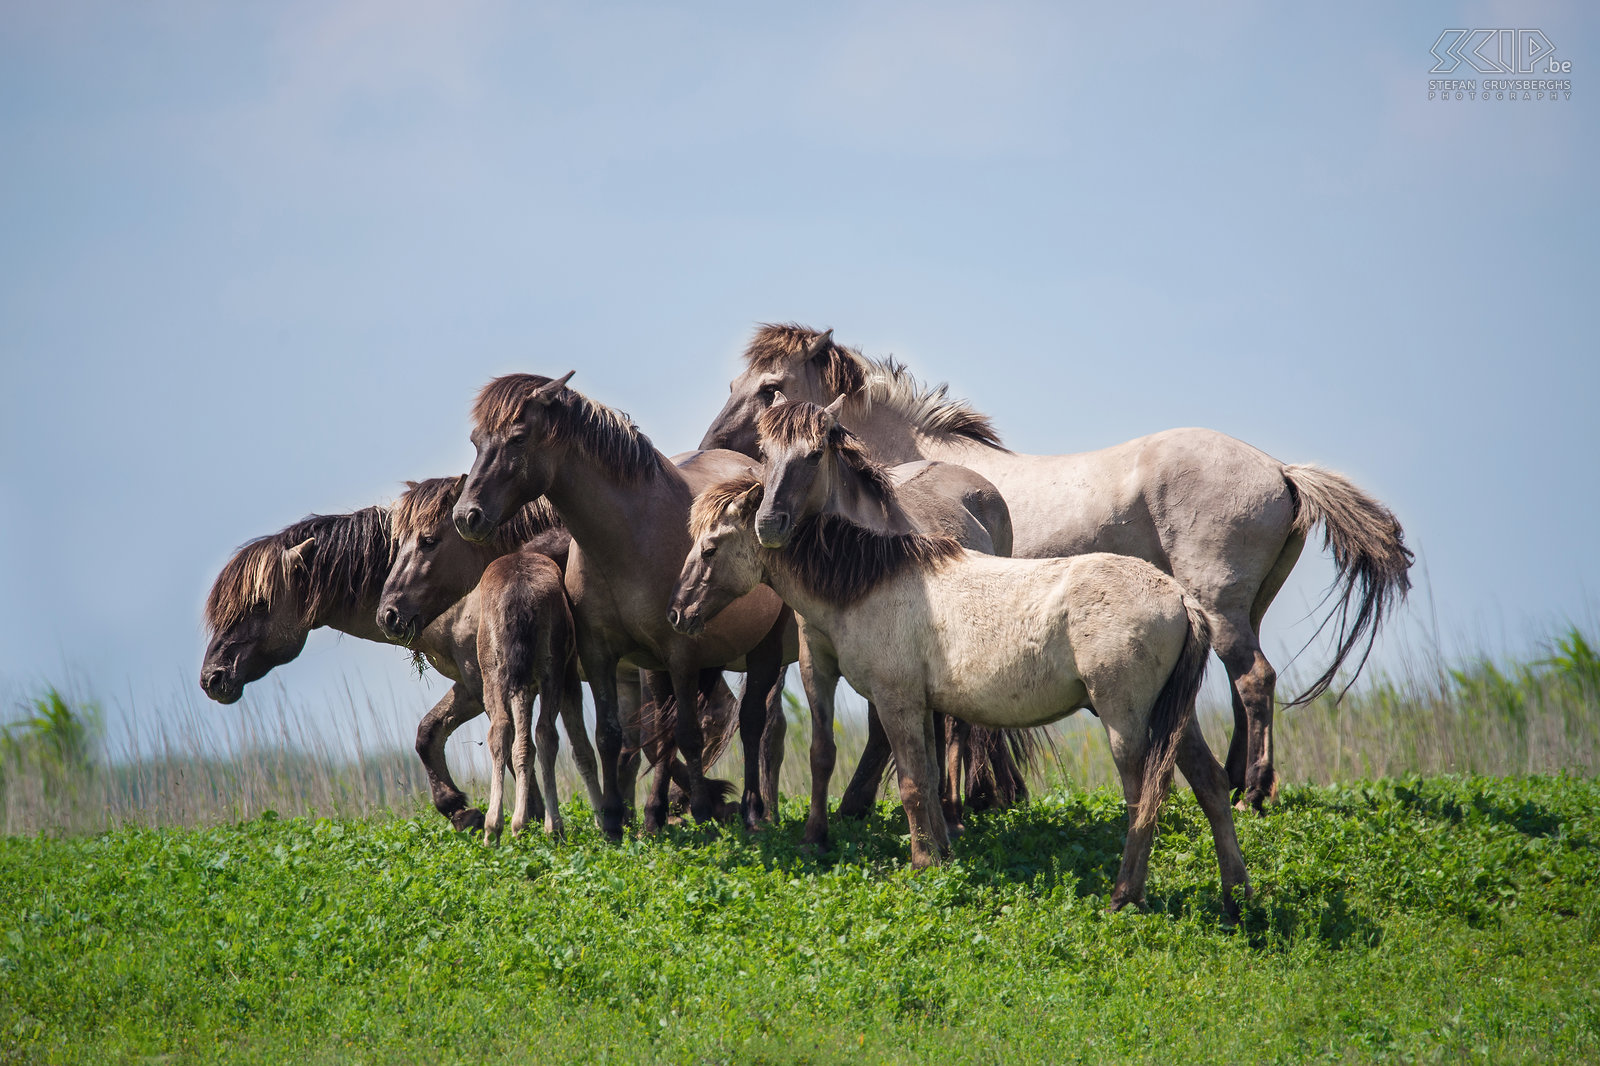 Oostvaardersplassen - Konik horses In the Oostvaardersplassen live about 1100 wild horses, the largest population in Europe. The Konik is originally a Polish and Belarusian small wild horse. They live in large groups with many foals and there is often a lot of interaction and even fights.  Stefan Cruysberghs